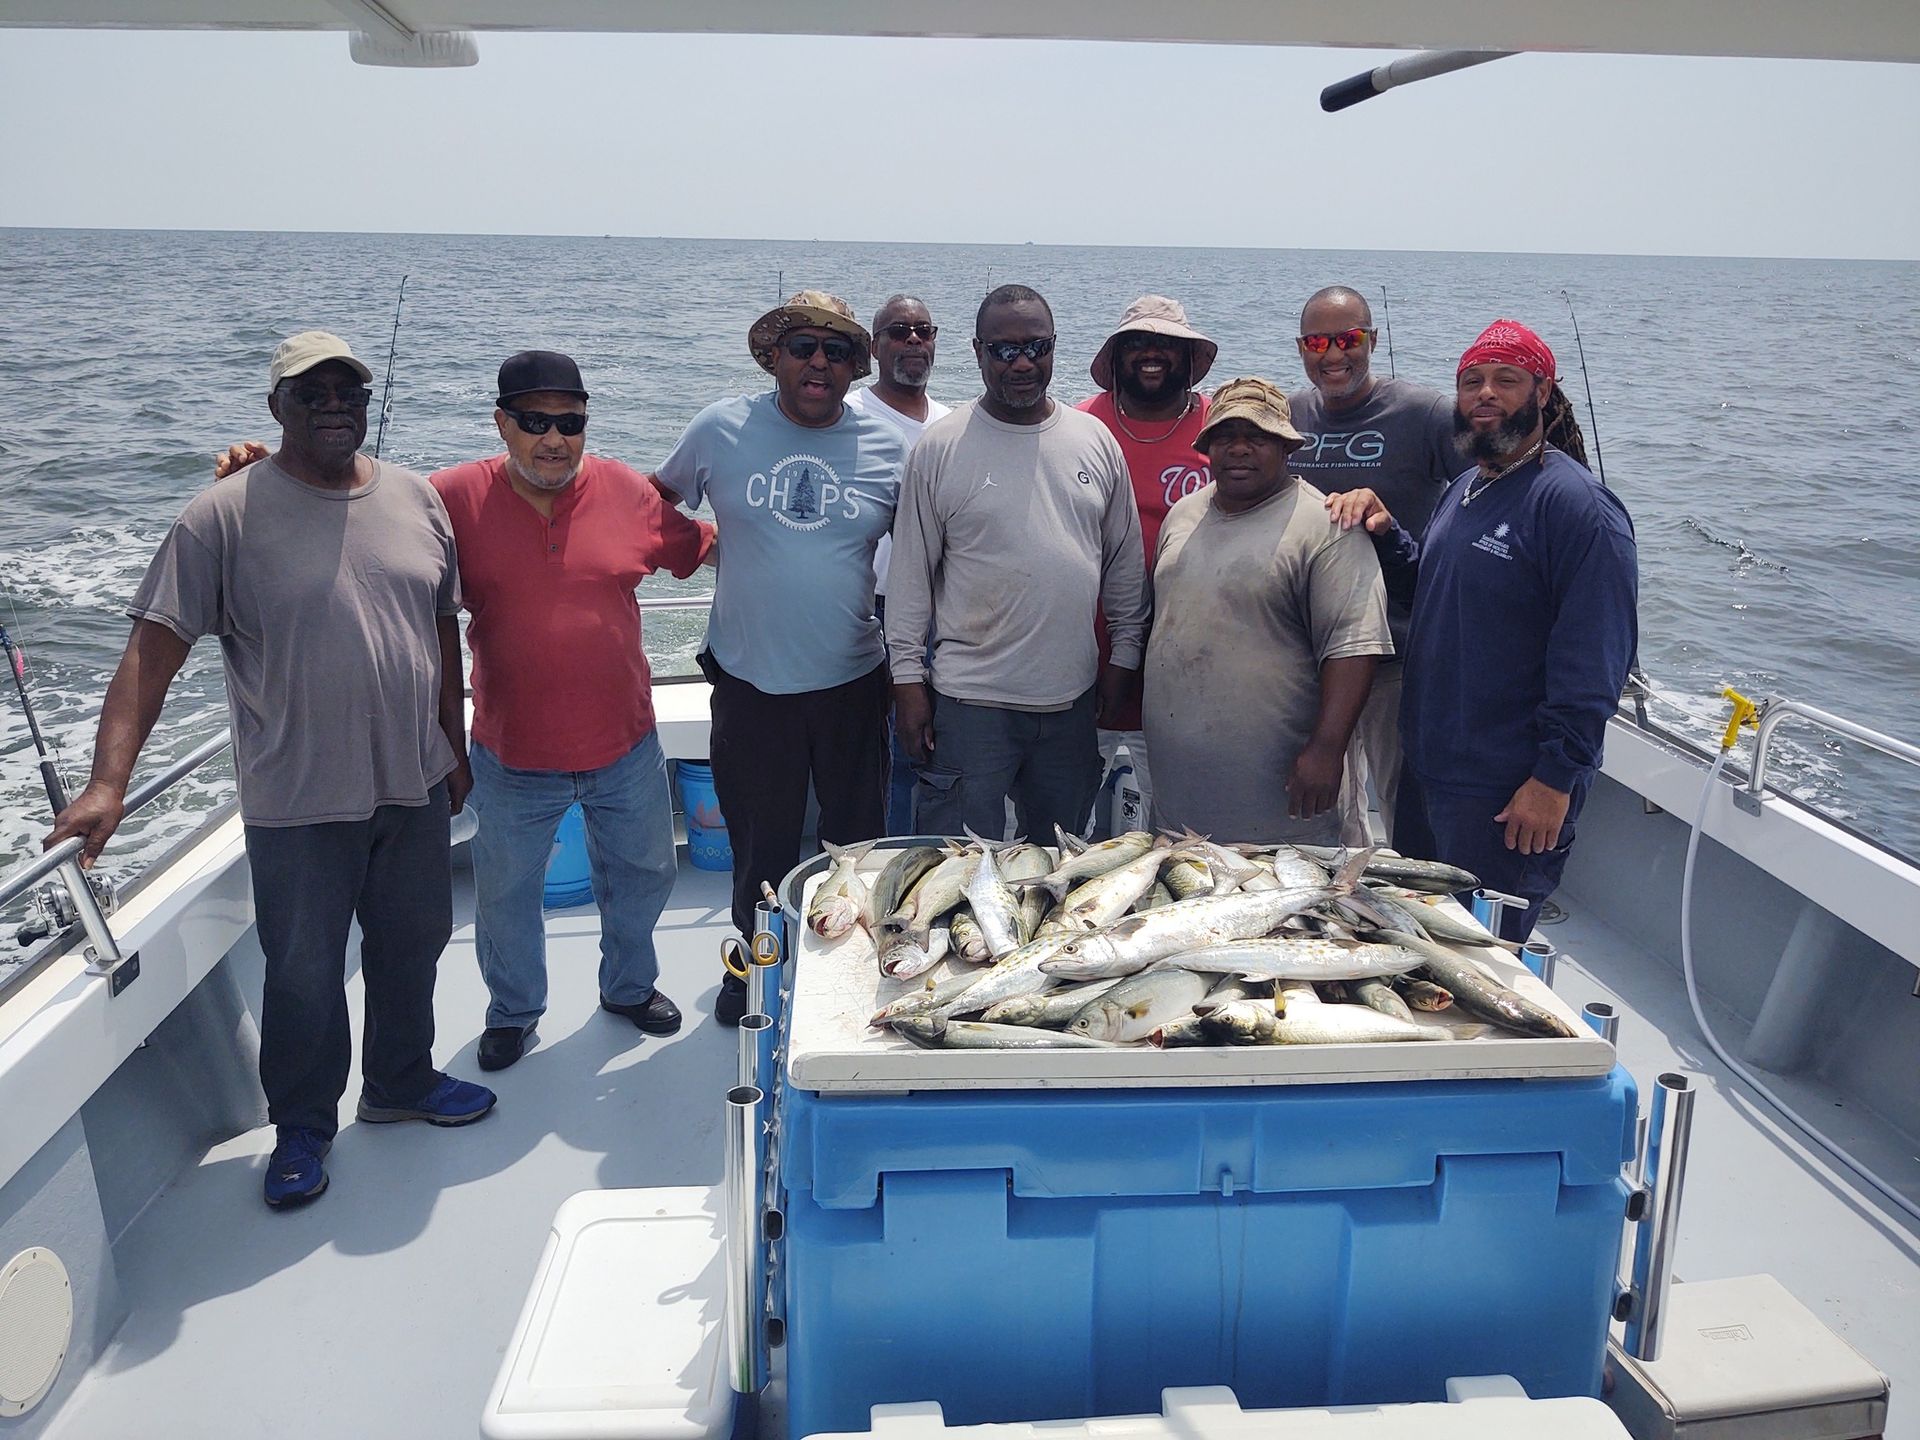 A group of men are posing for a picture on a boat filled with fish.